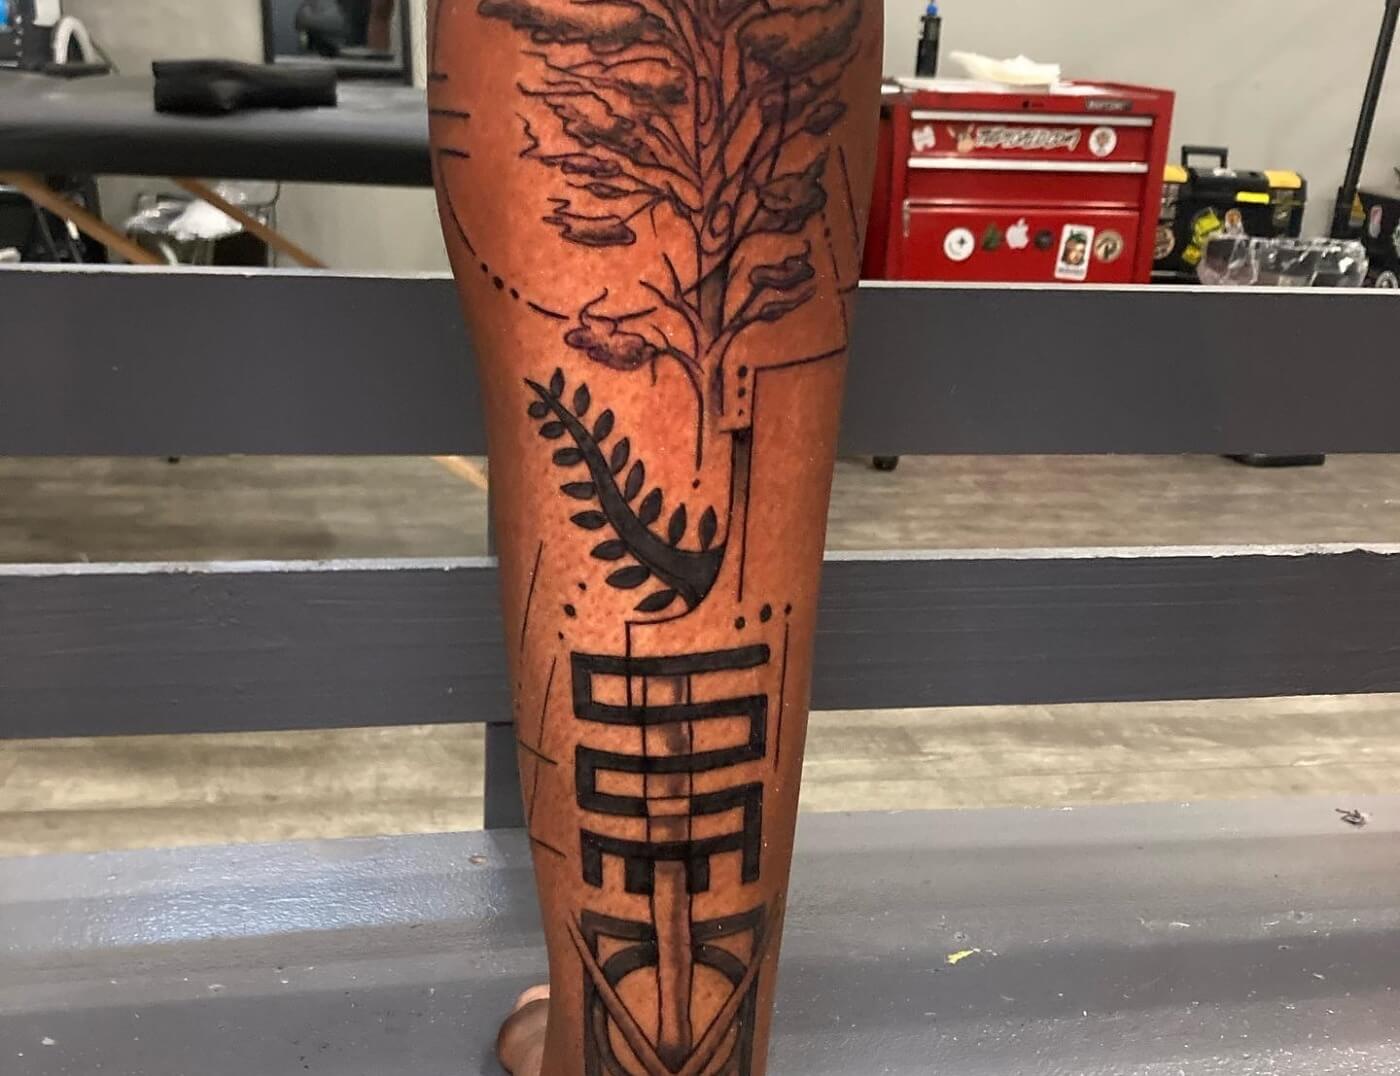 Tree Of Life With Adrinka Symbols Tattoo In Black & Grey By Funk Tha World At Iron Palm Tattoos. Call 404-973-7828 or stop by for a free consultation with Funk. Walk ins are welcome.